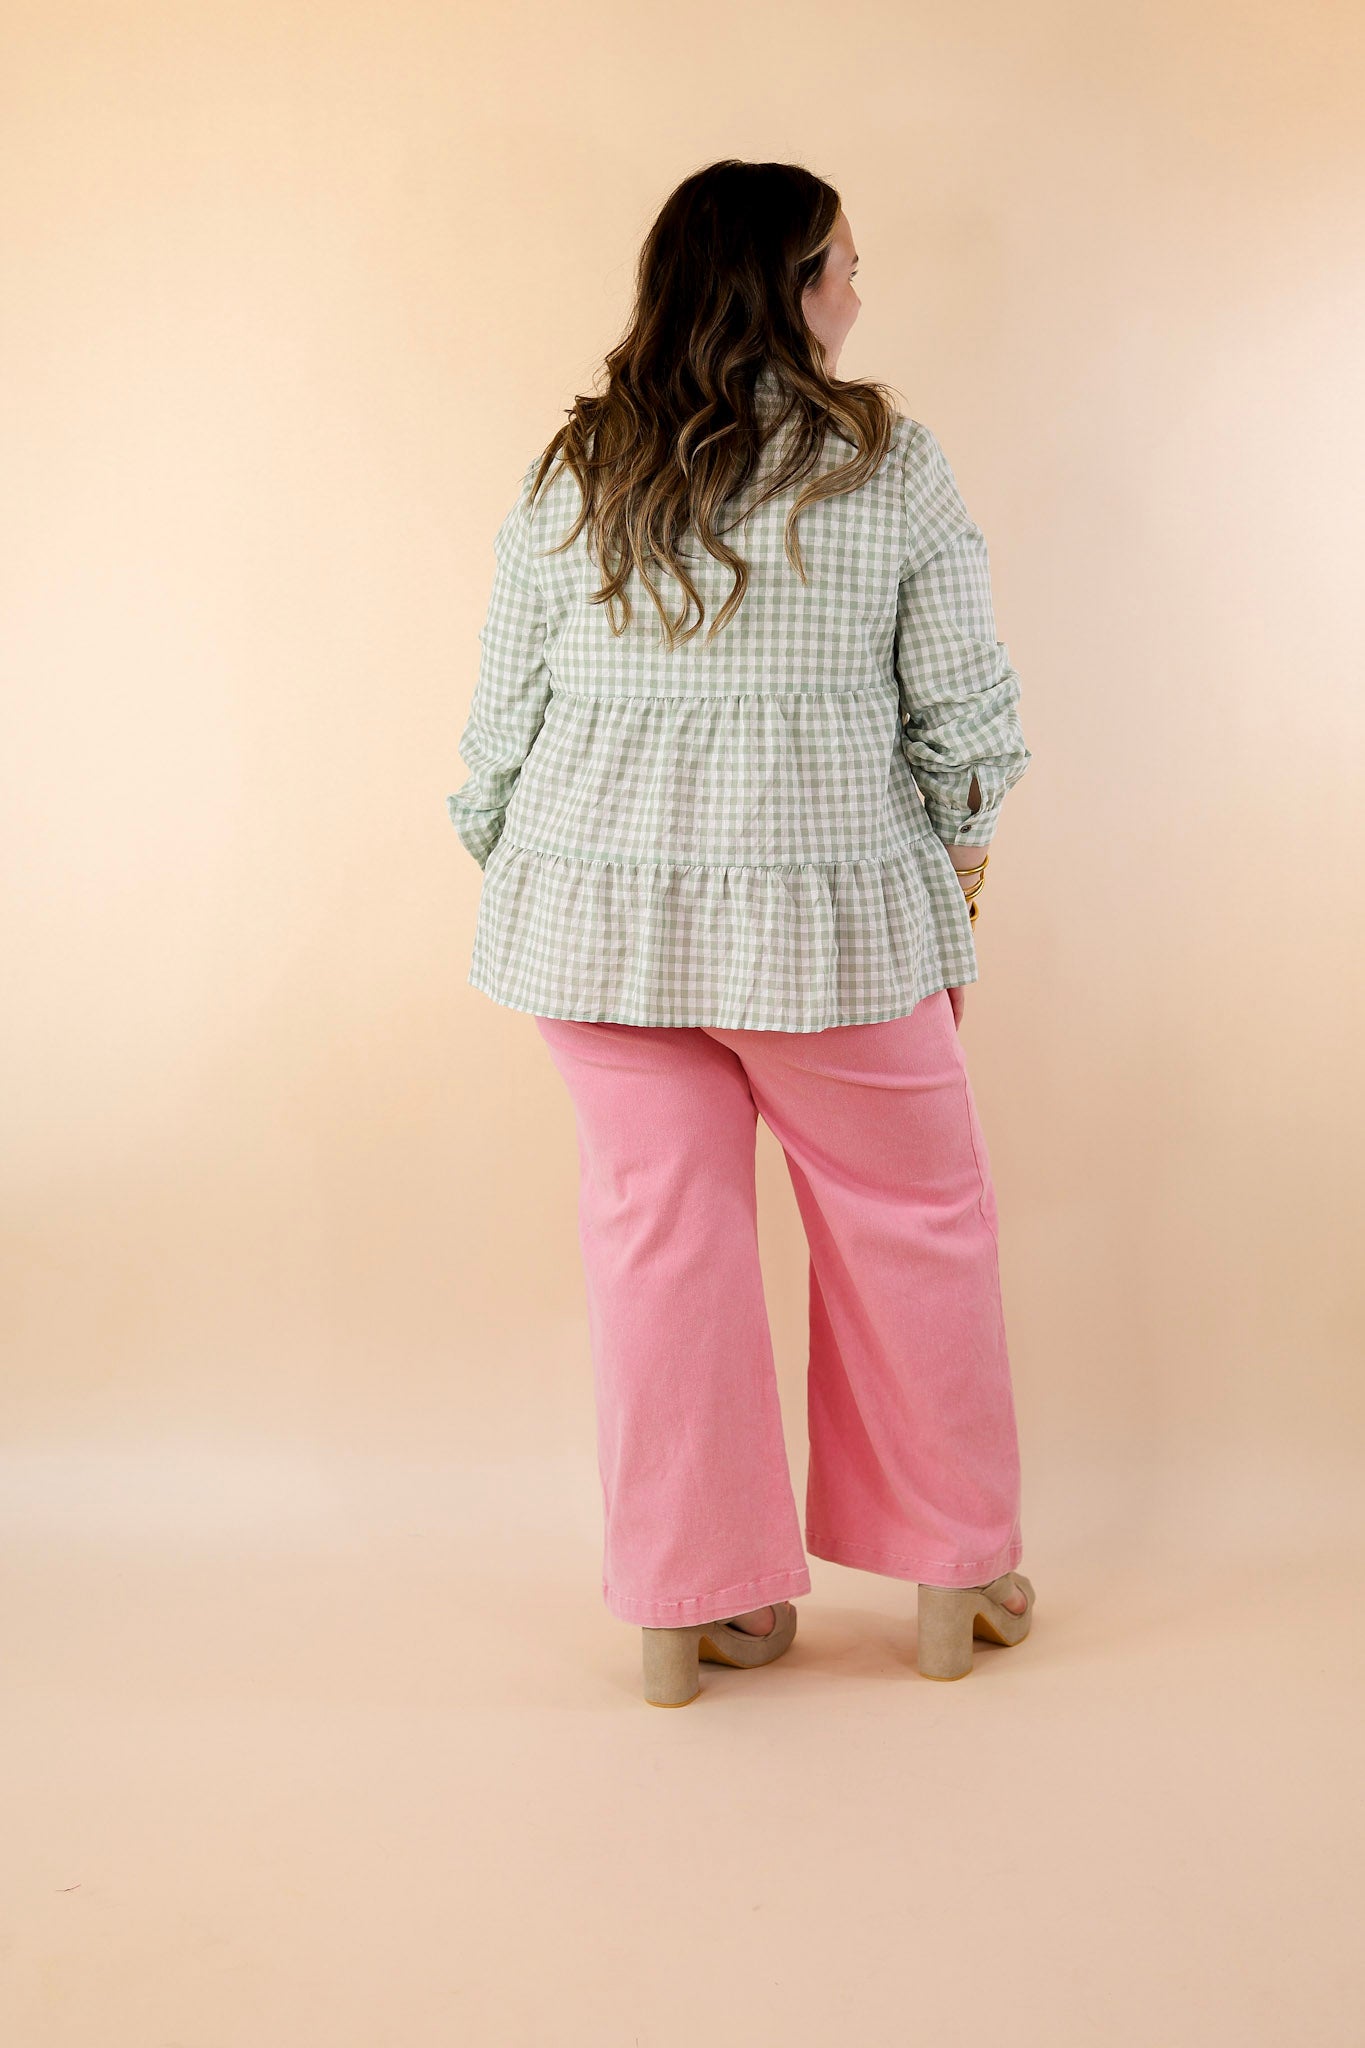 Wonderful Wishes Button Up Gingham Top with Long Sleeves in Sage Green - Giddy Up Glamour Boutique